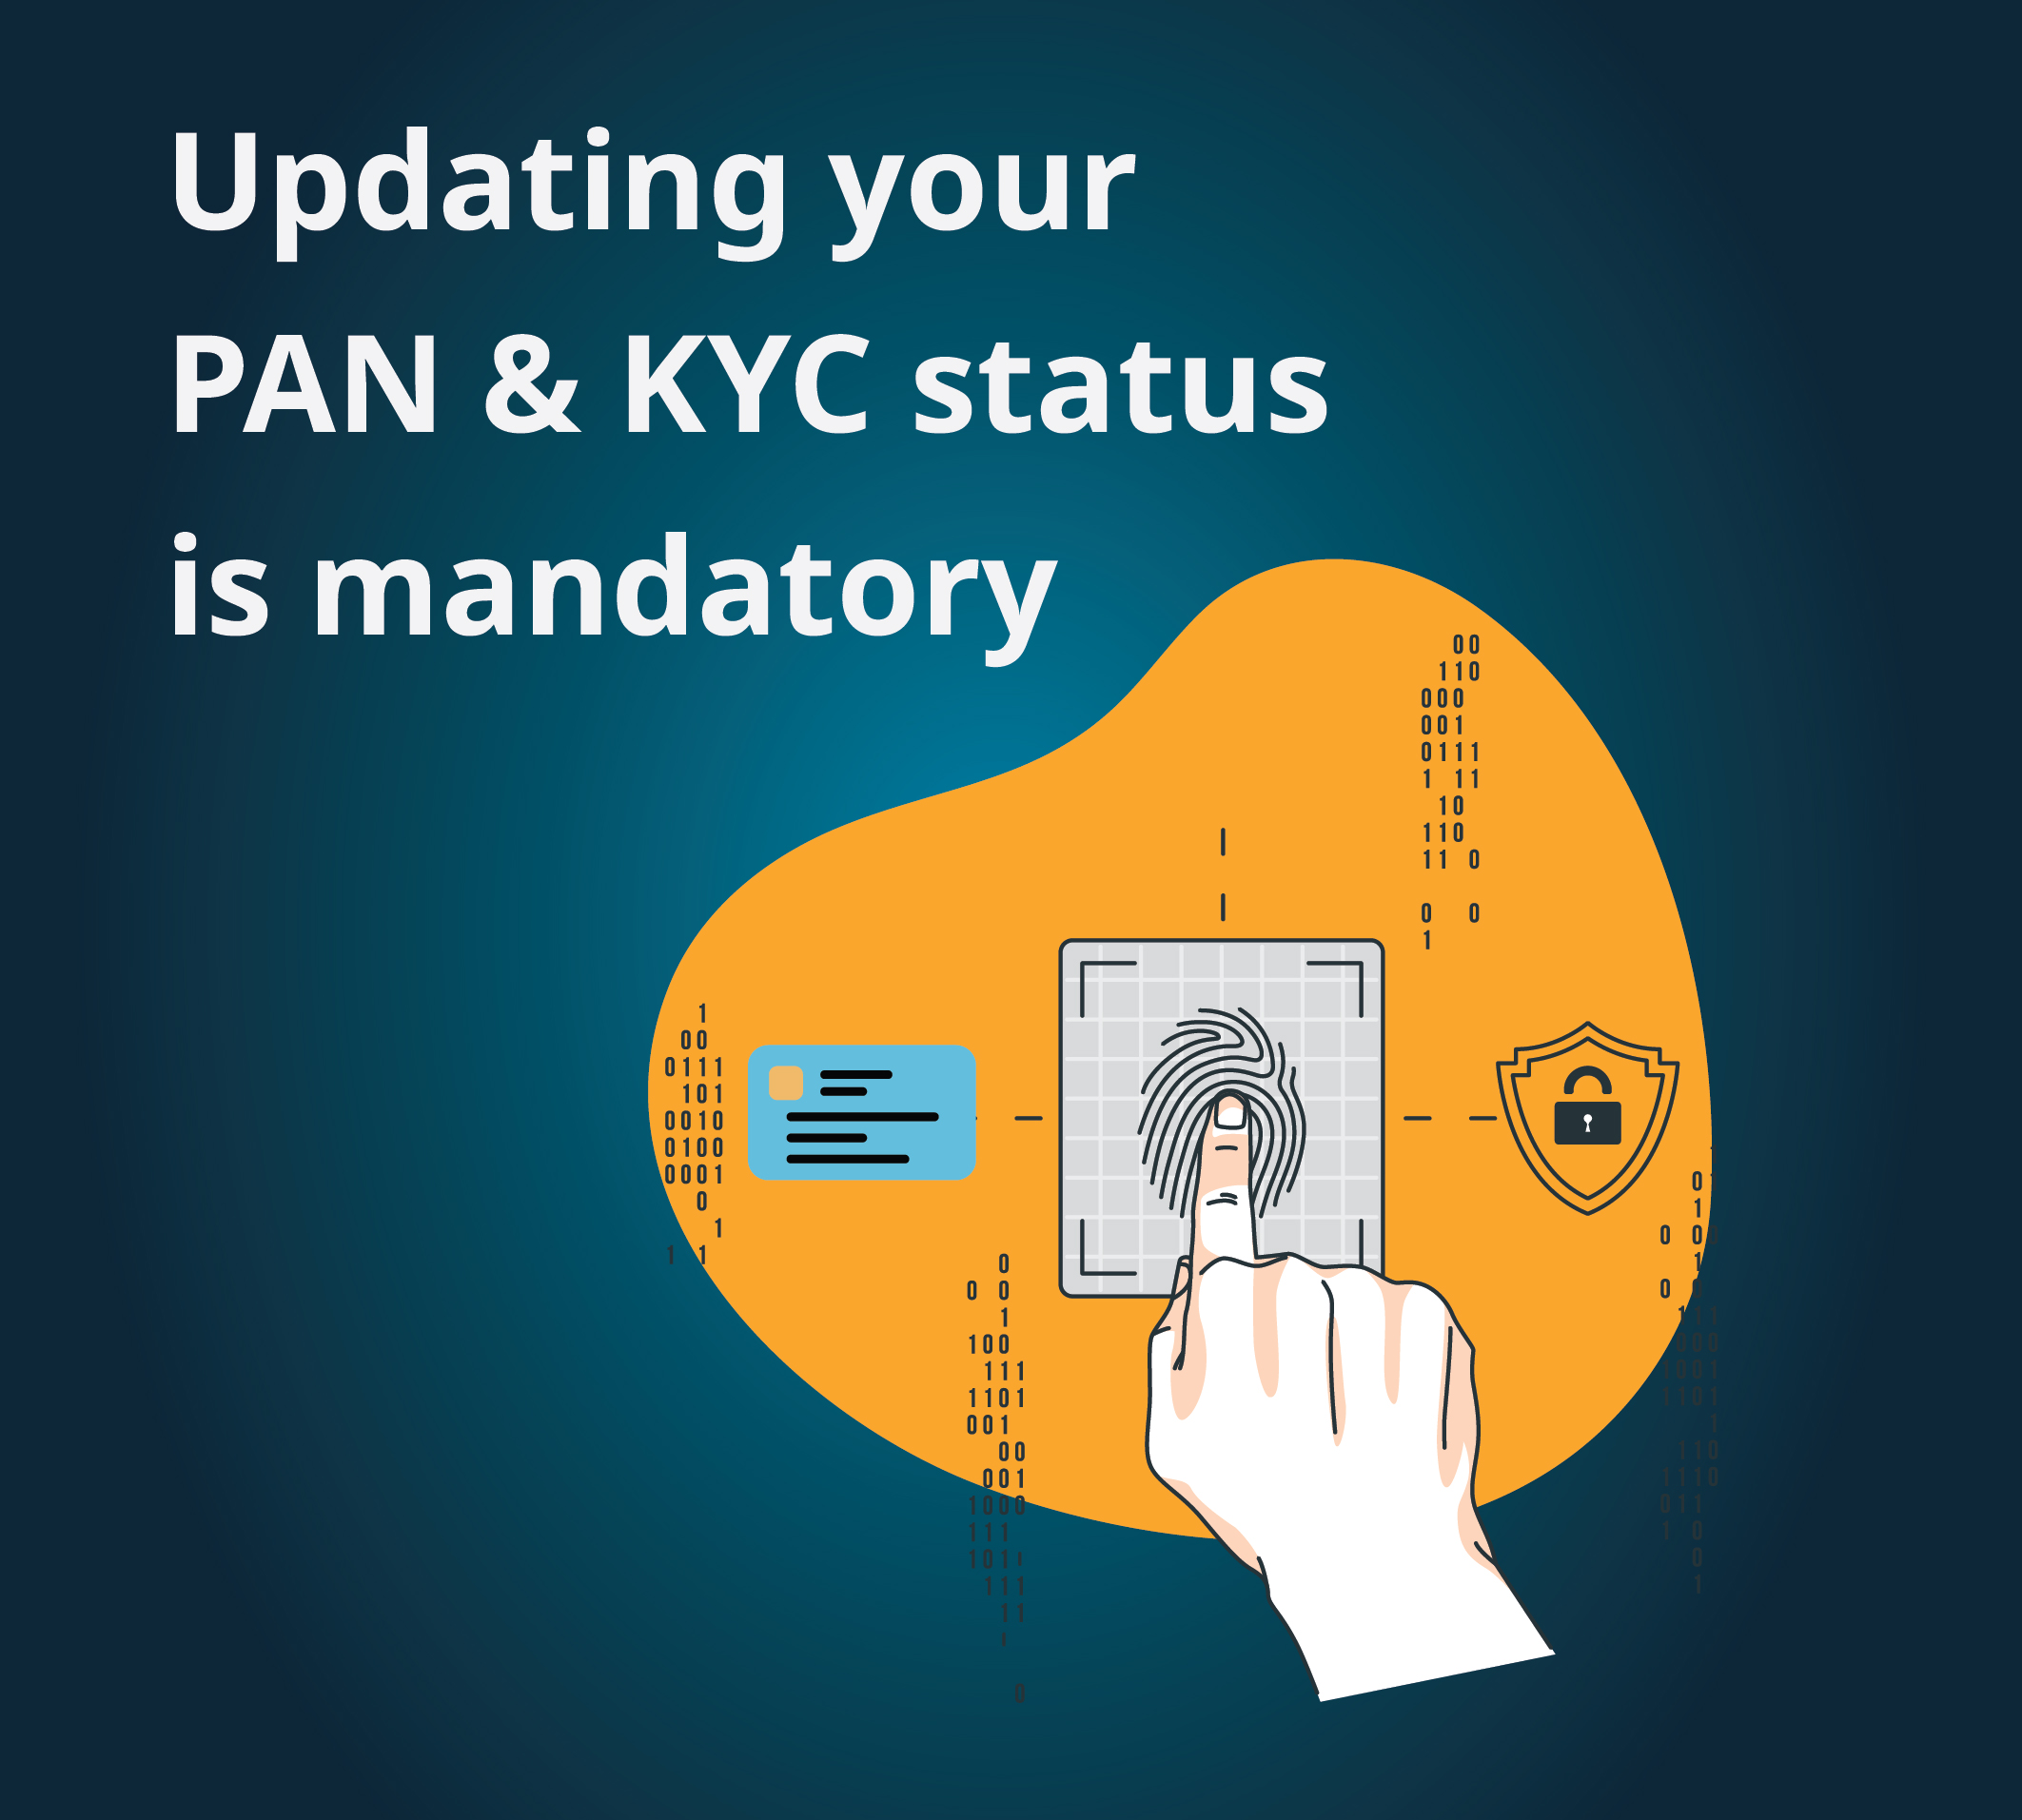 Update Your PAN & KYC